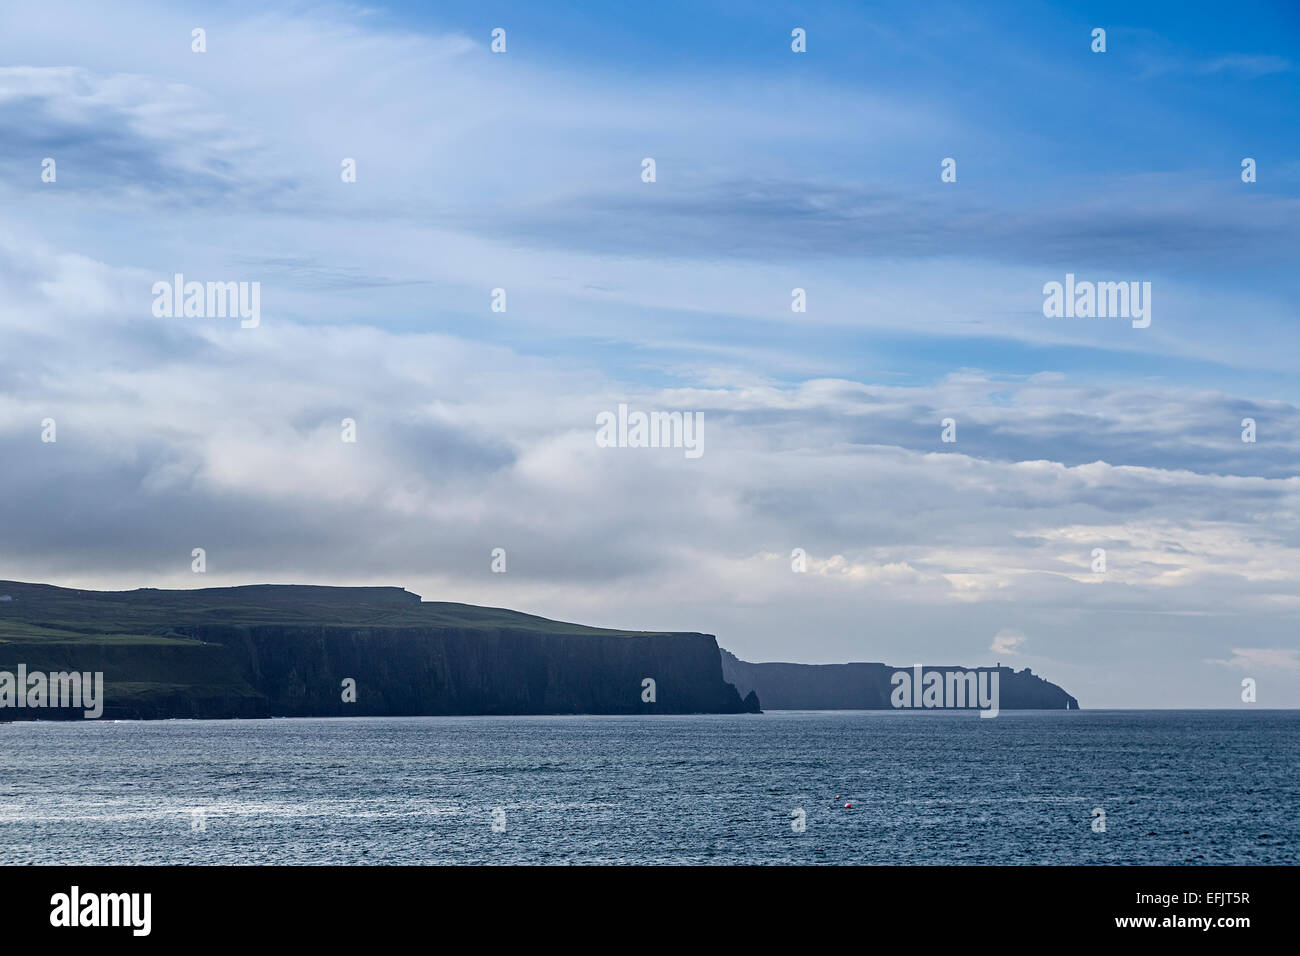 Cliffs of Moher from Doolin, Co. Clare, Ireland Stock Photo